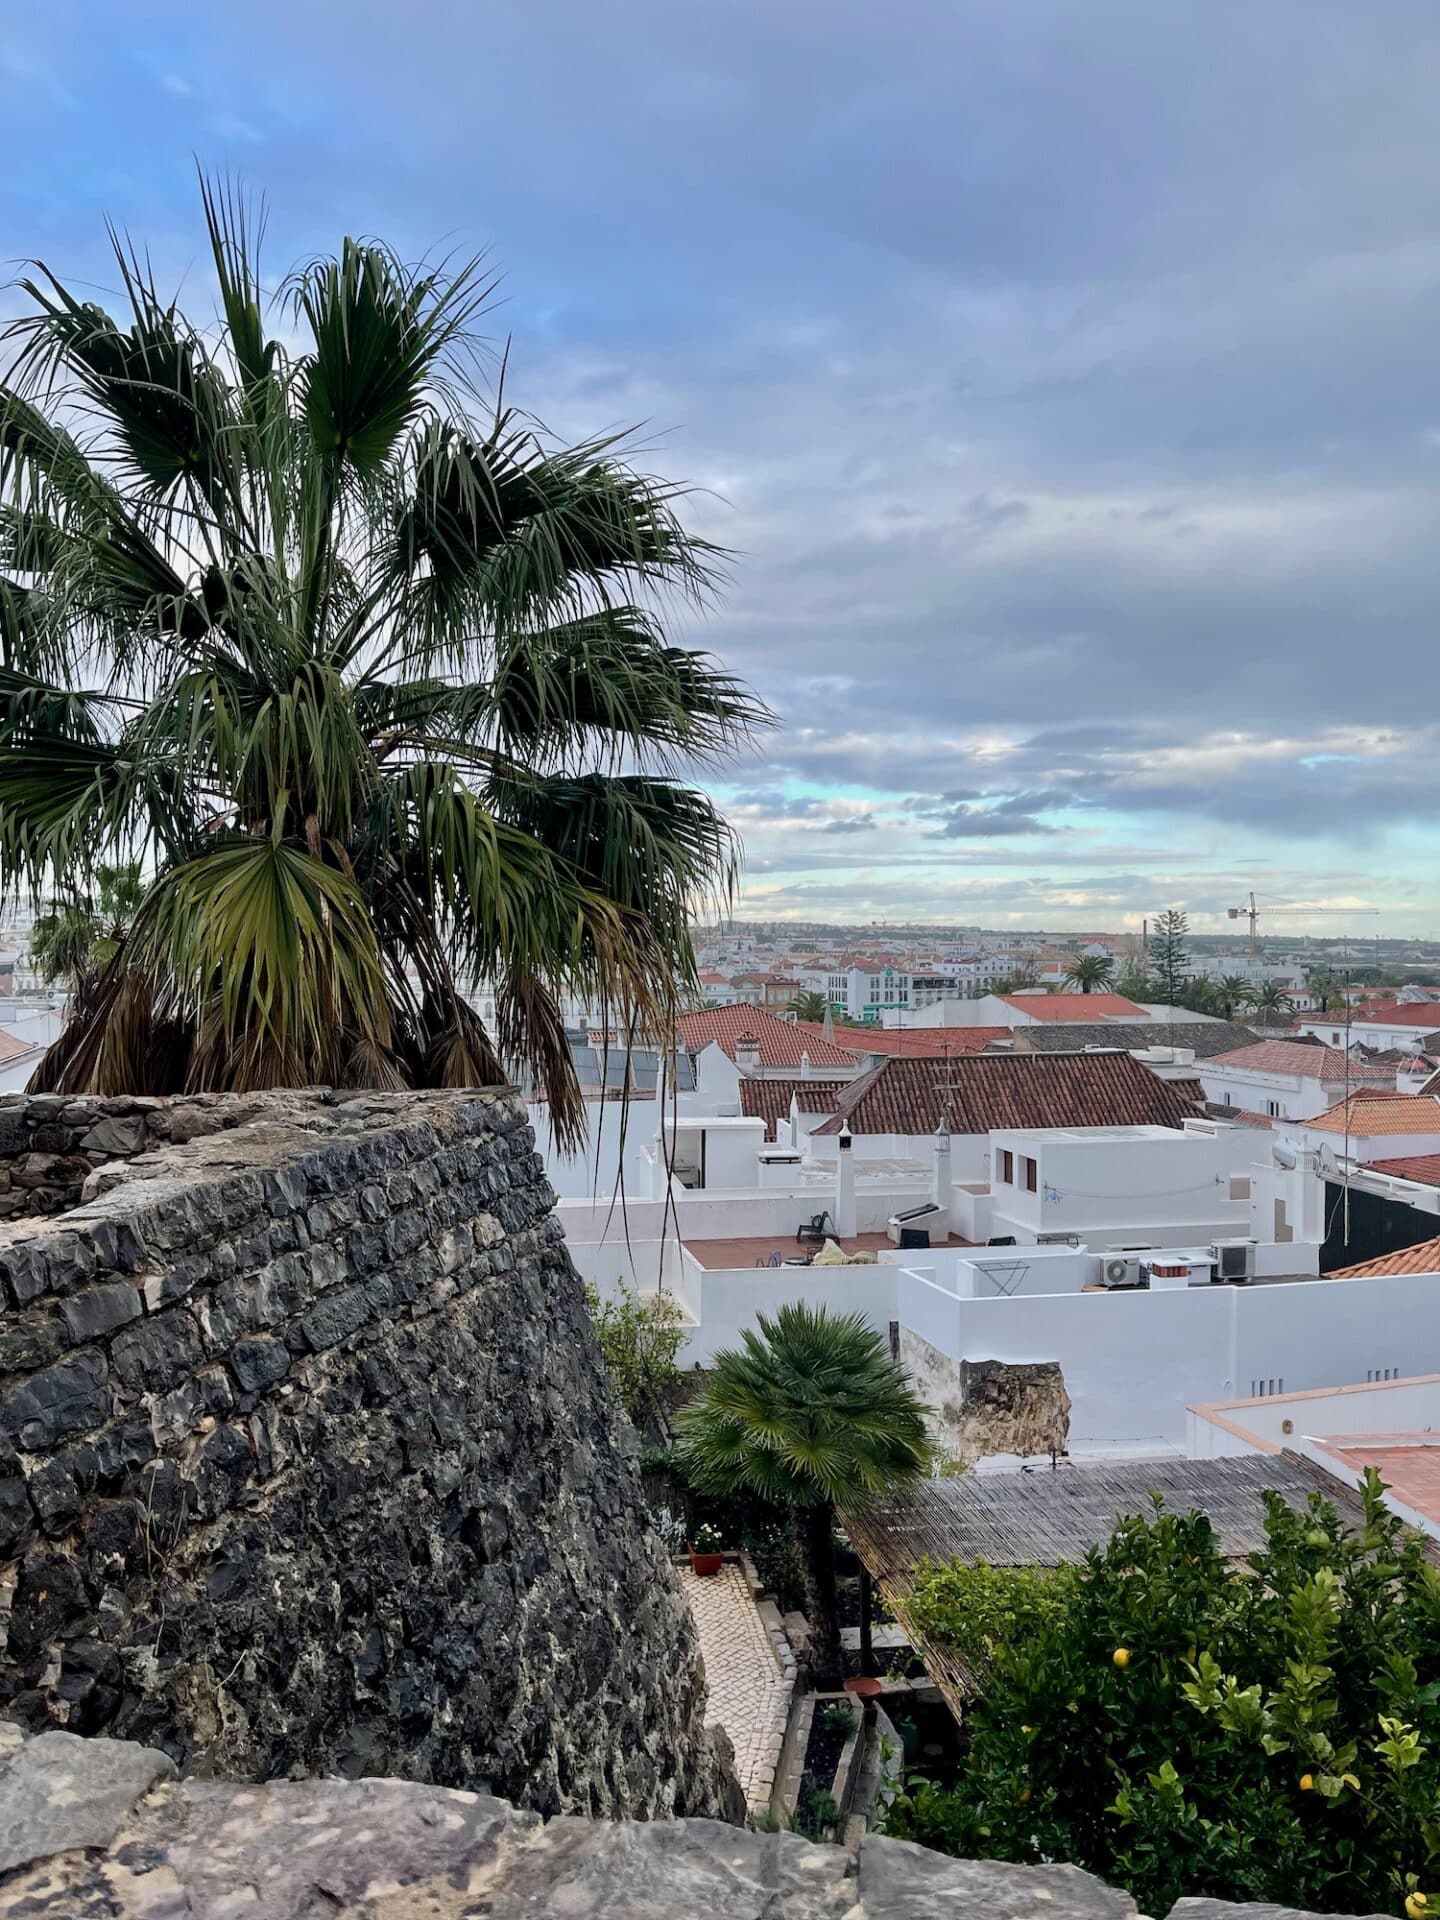 A lush palm tree stands out against the backdrop of a cloudy sky, with a view over the white buildings and terracotta roofs of Tavira, Portugal.